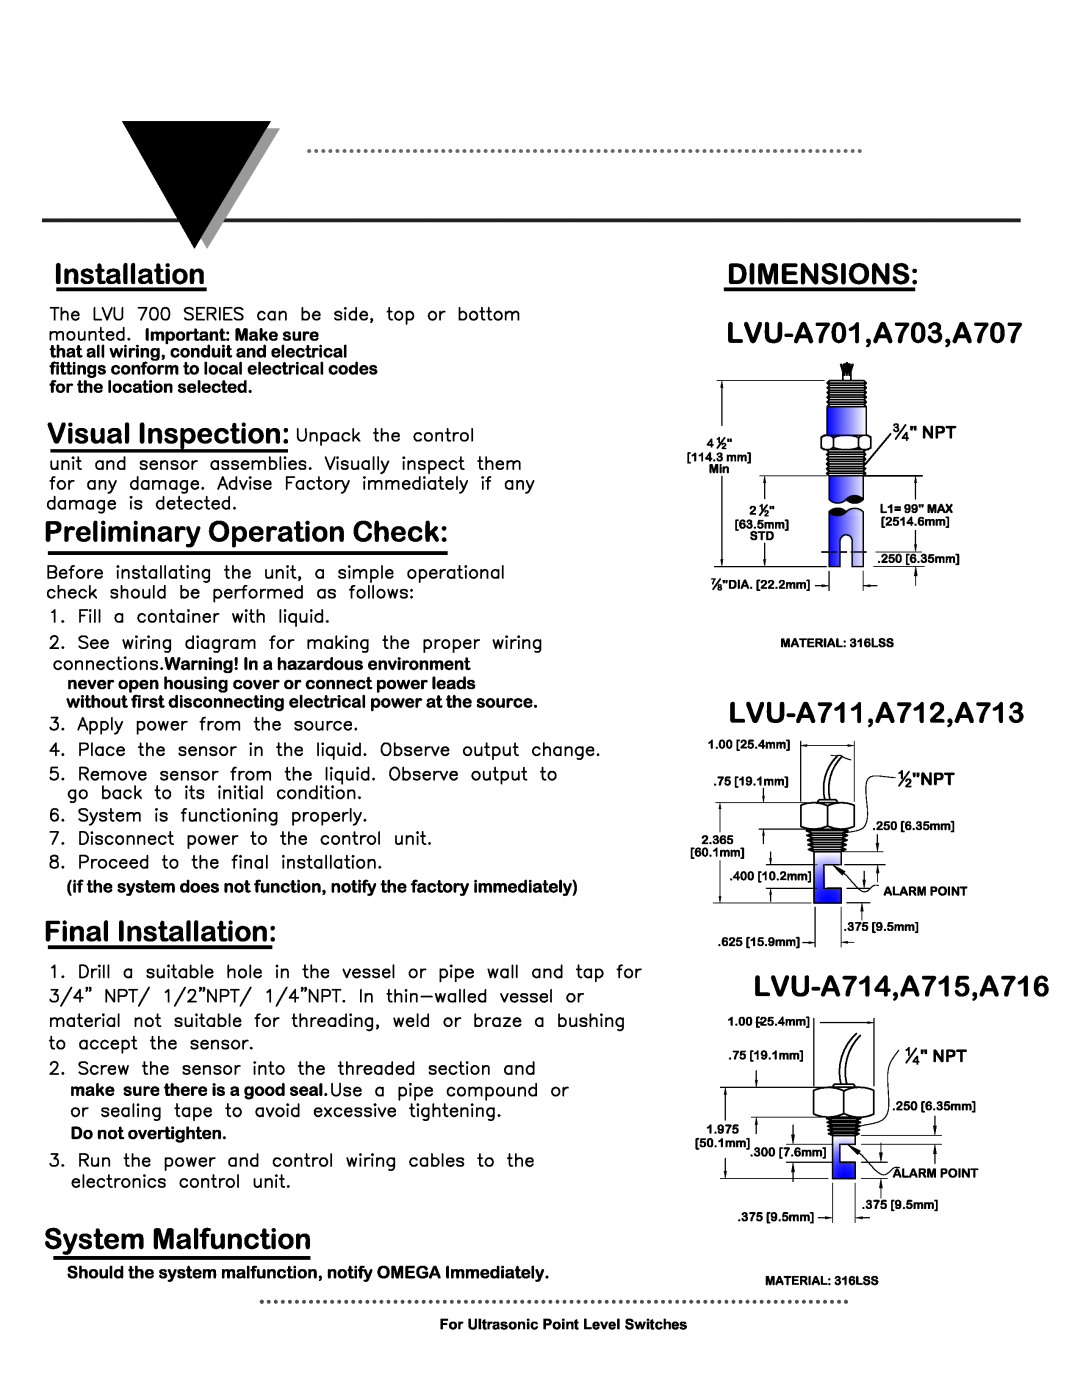 Omega Engineering LVU-700 manual For Ultrasonic Point Level Switches 